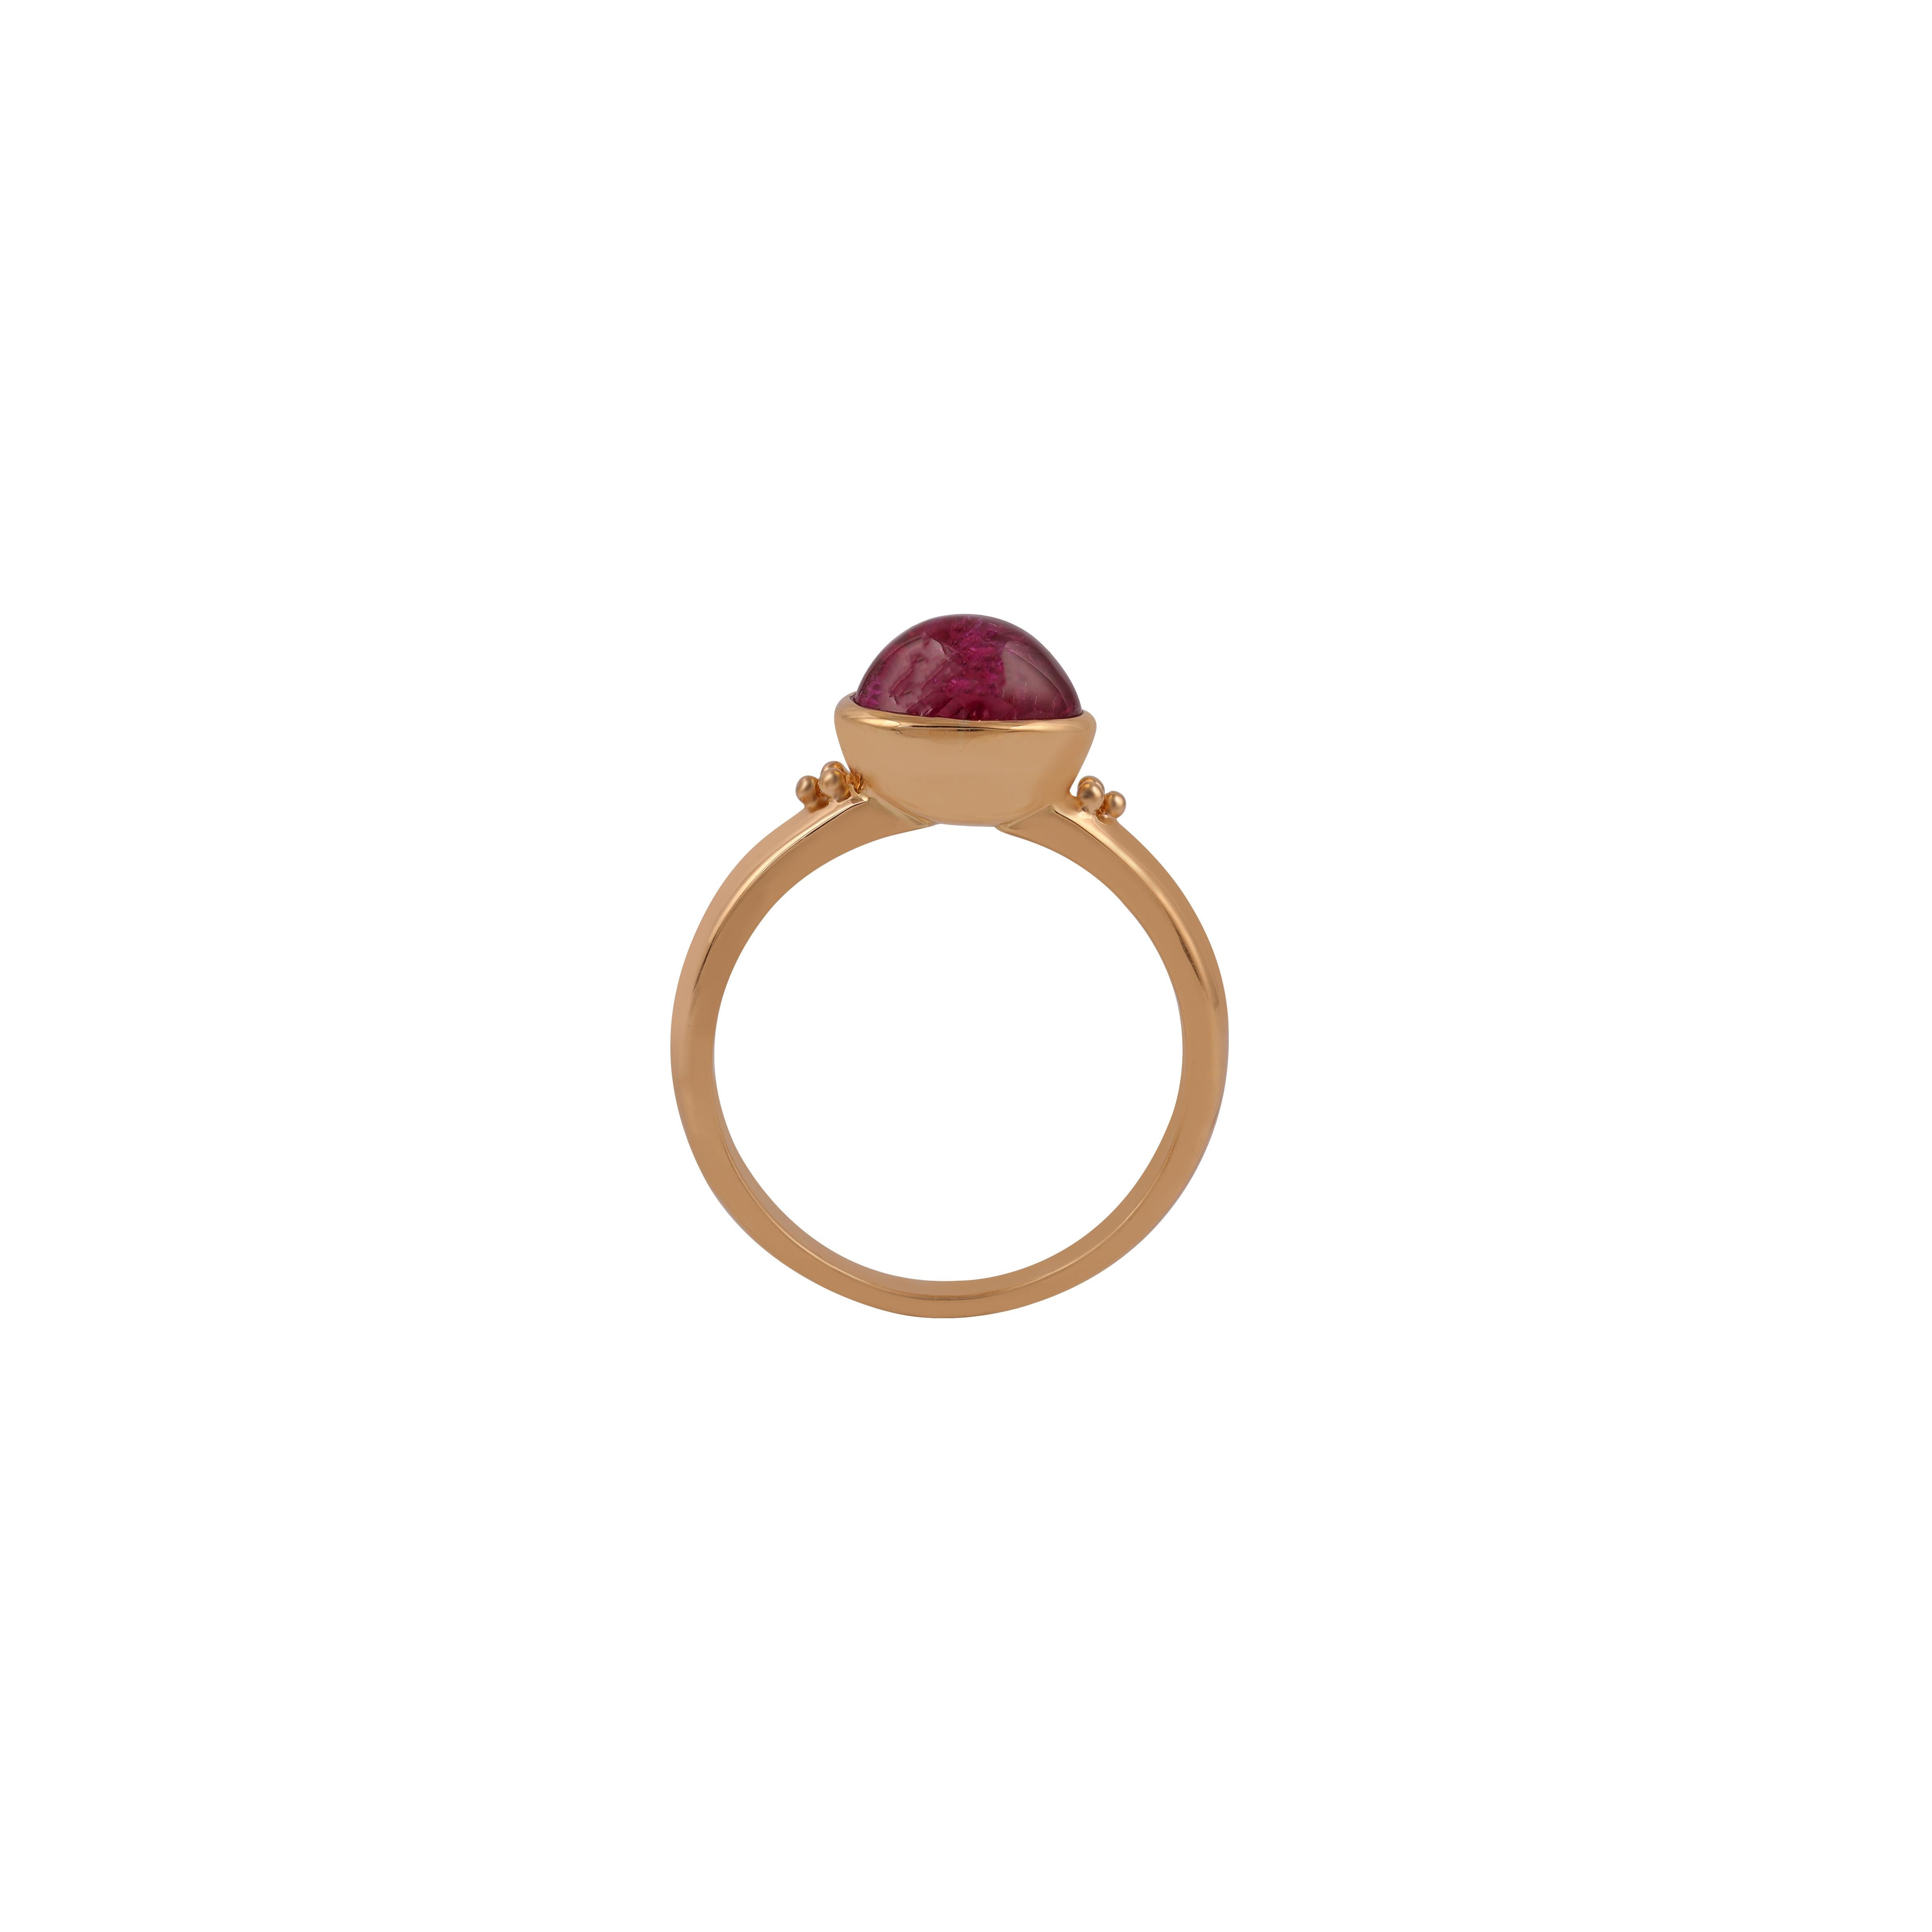 A 3.48-carat Natural cabochon Burma ruby classic ring. For centuries, the Burmese ruby has ranked among the most sought-after gemstones in the world, as stones that hail from these legendary mines are set apart by their incomparable red color. 
Set